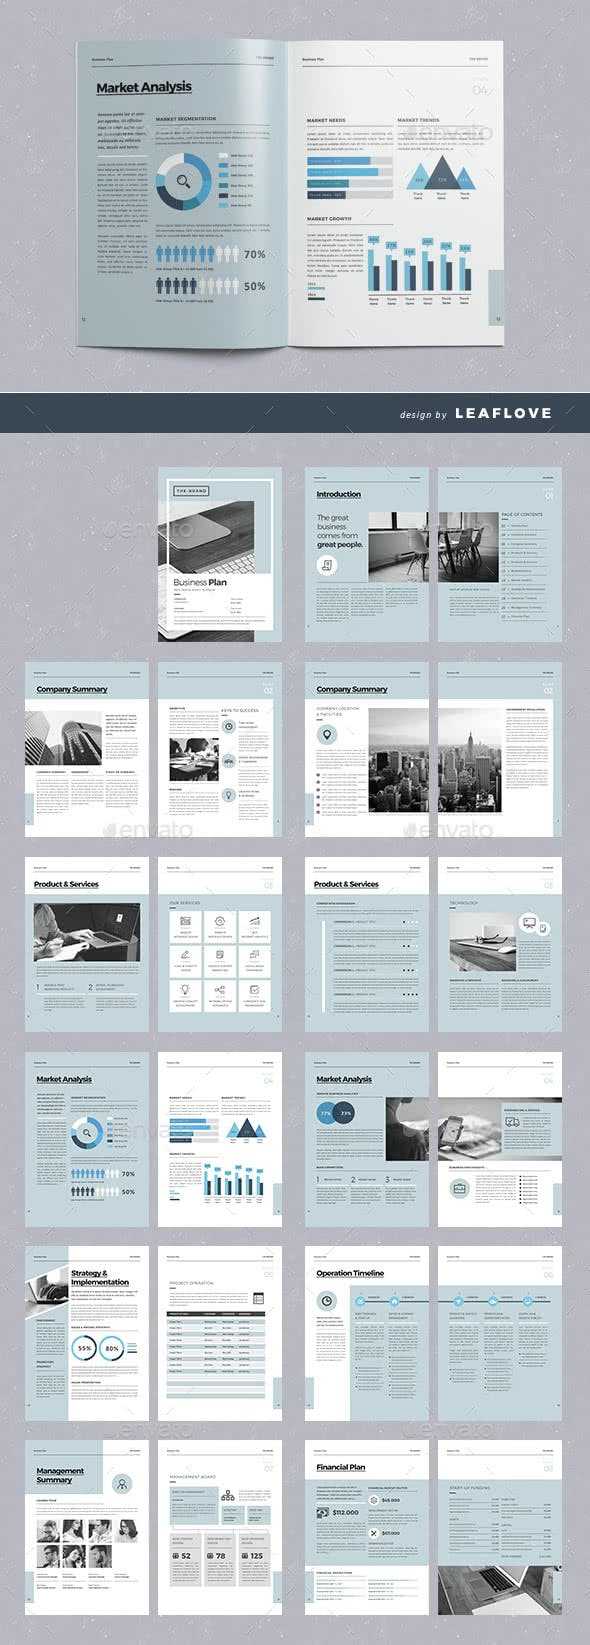 75 Fresh Indesign Templates (And Where To Find More) Regarding Free Indesign Report Templates